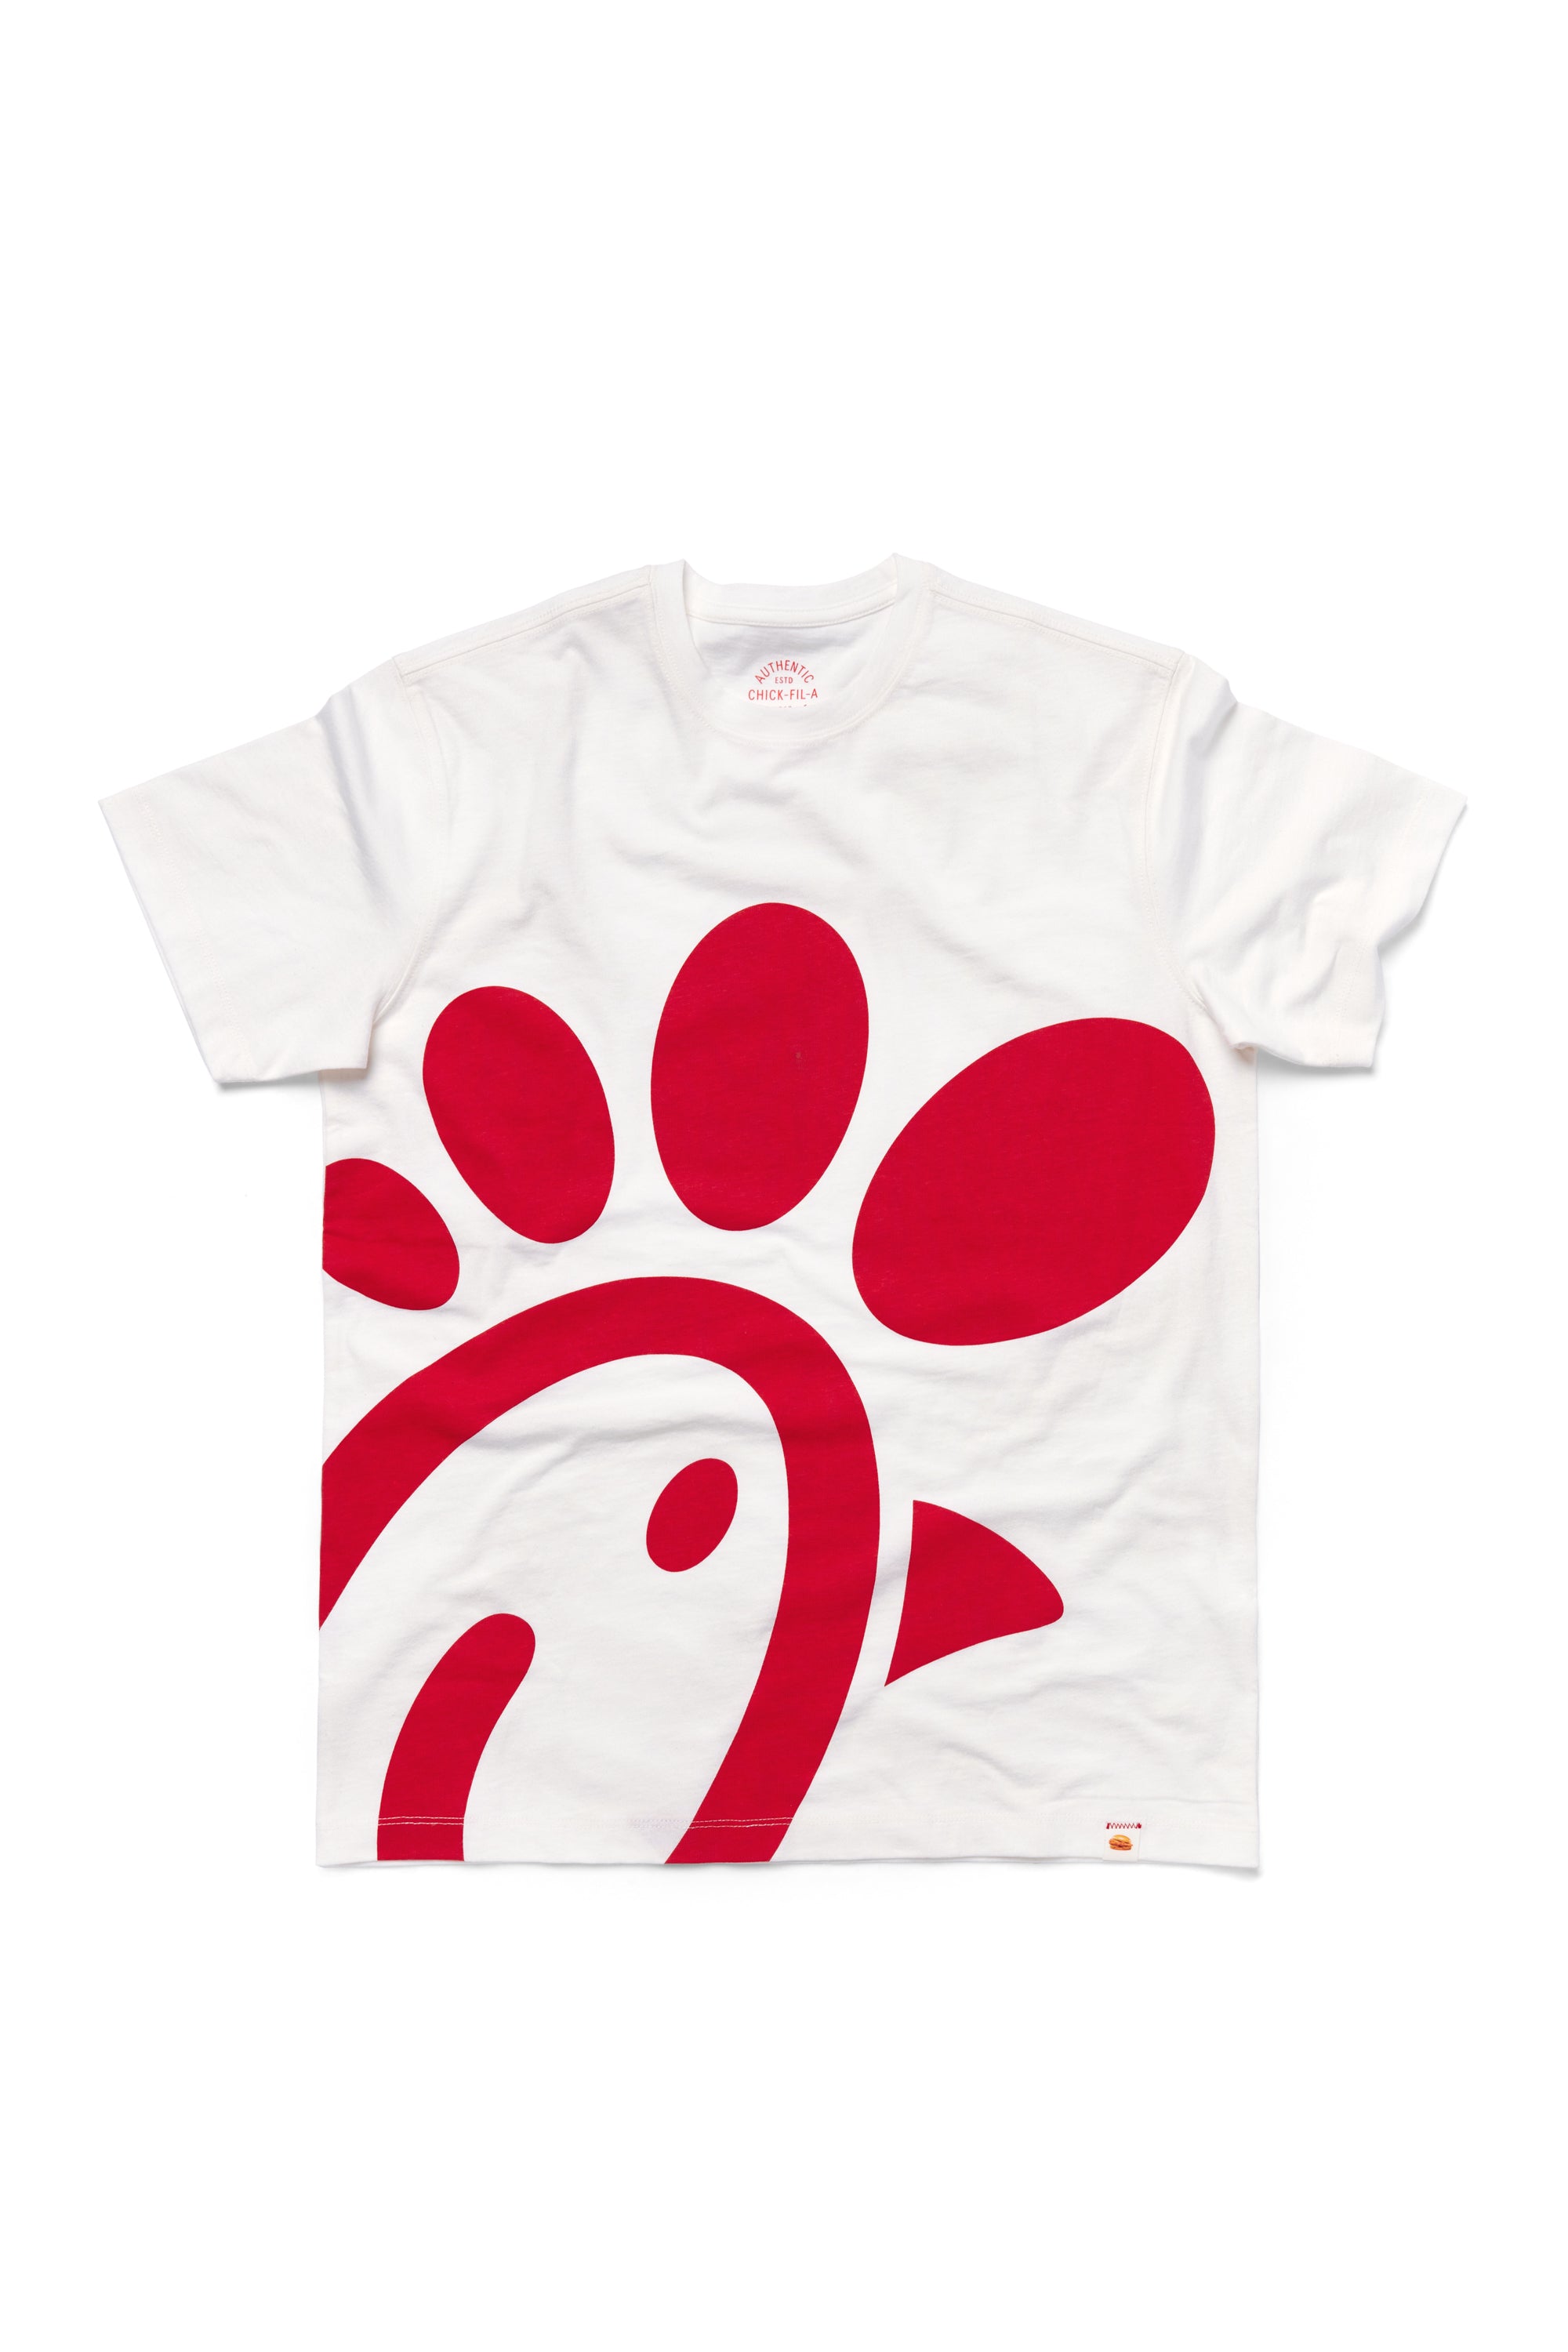 Chick-fil-A Logo Print Tee with large red Chick-fil-A logo in bottom right